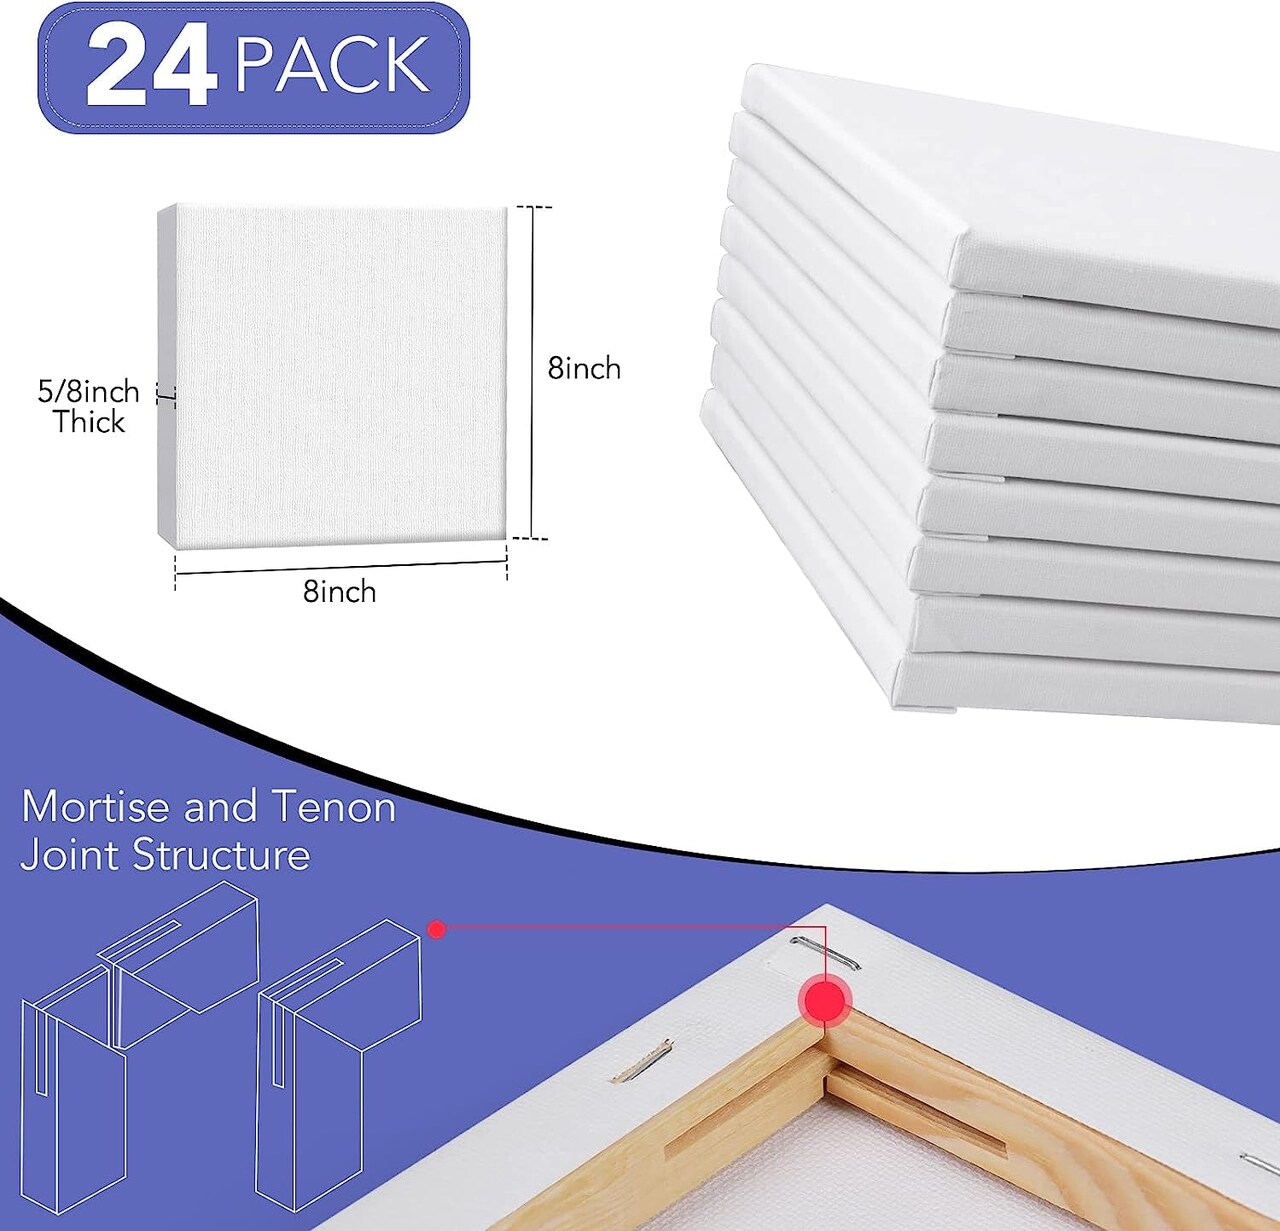 Stretched Canvases for Painting, 8X8, Pack of 24, Primed Acid-Free, 5/8  Inch Thick Wood Frame Blank Canvas, Art Canvases for Beginners, Artists for